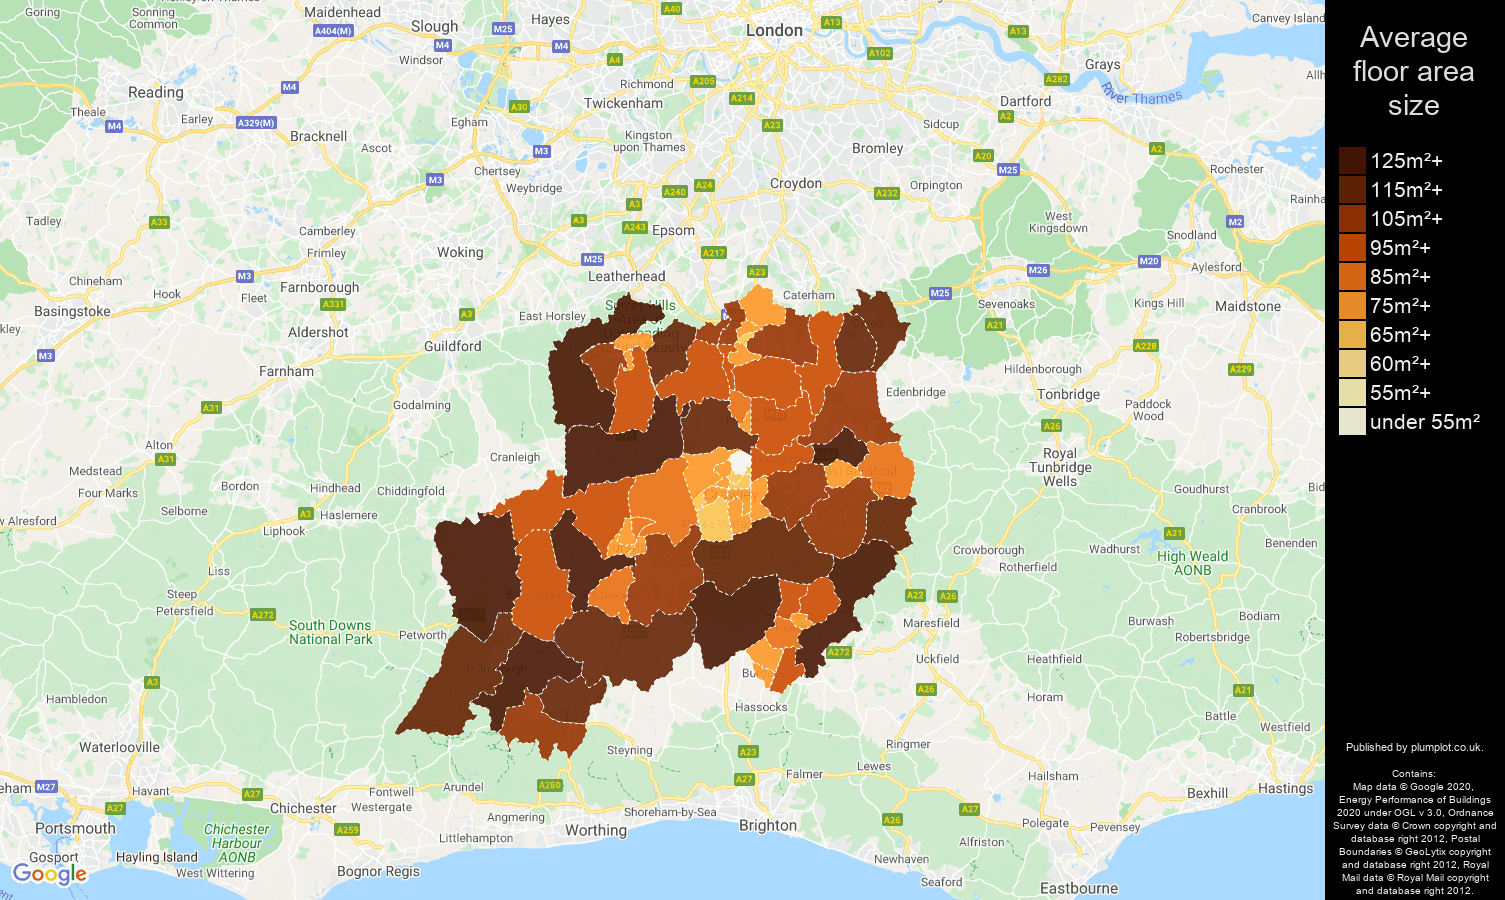 Redhill map of average floor area size of properties